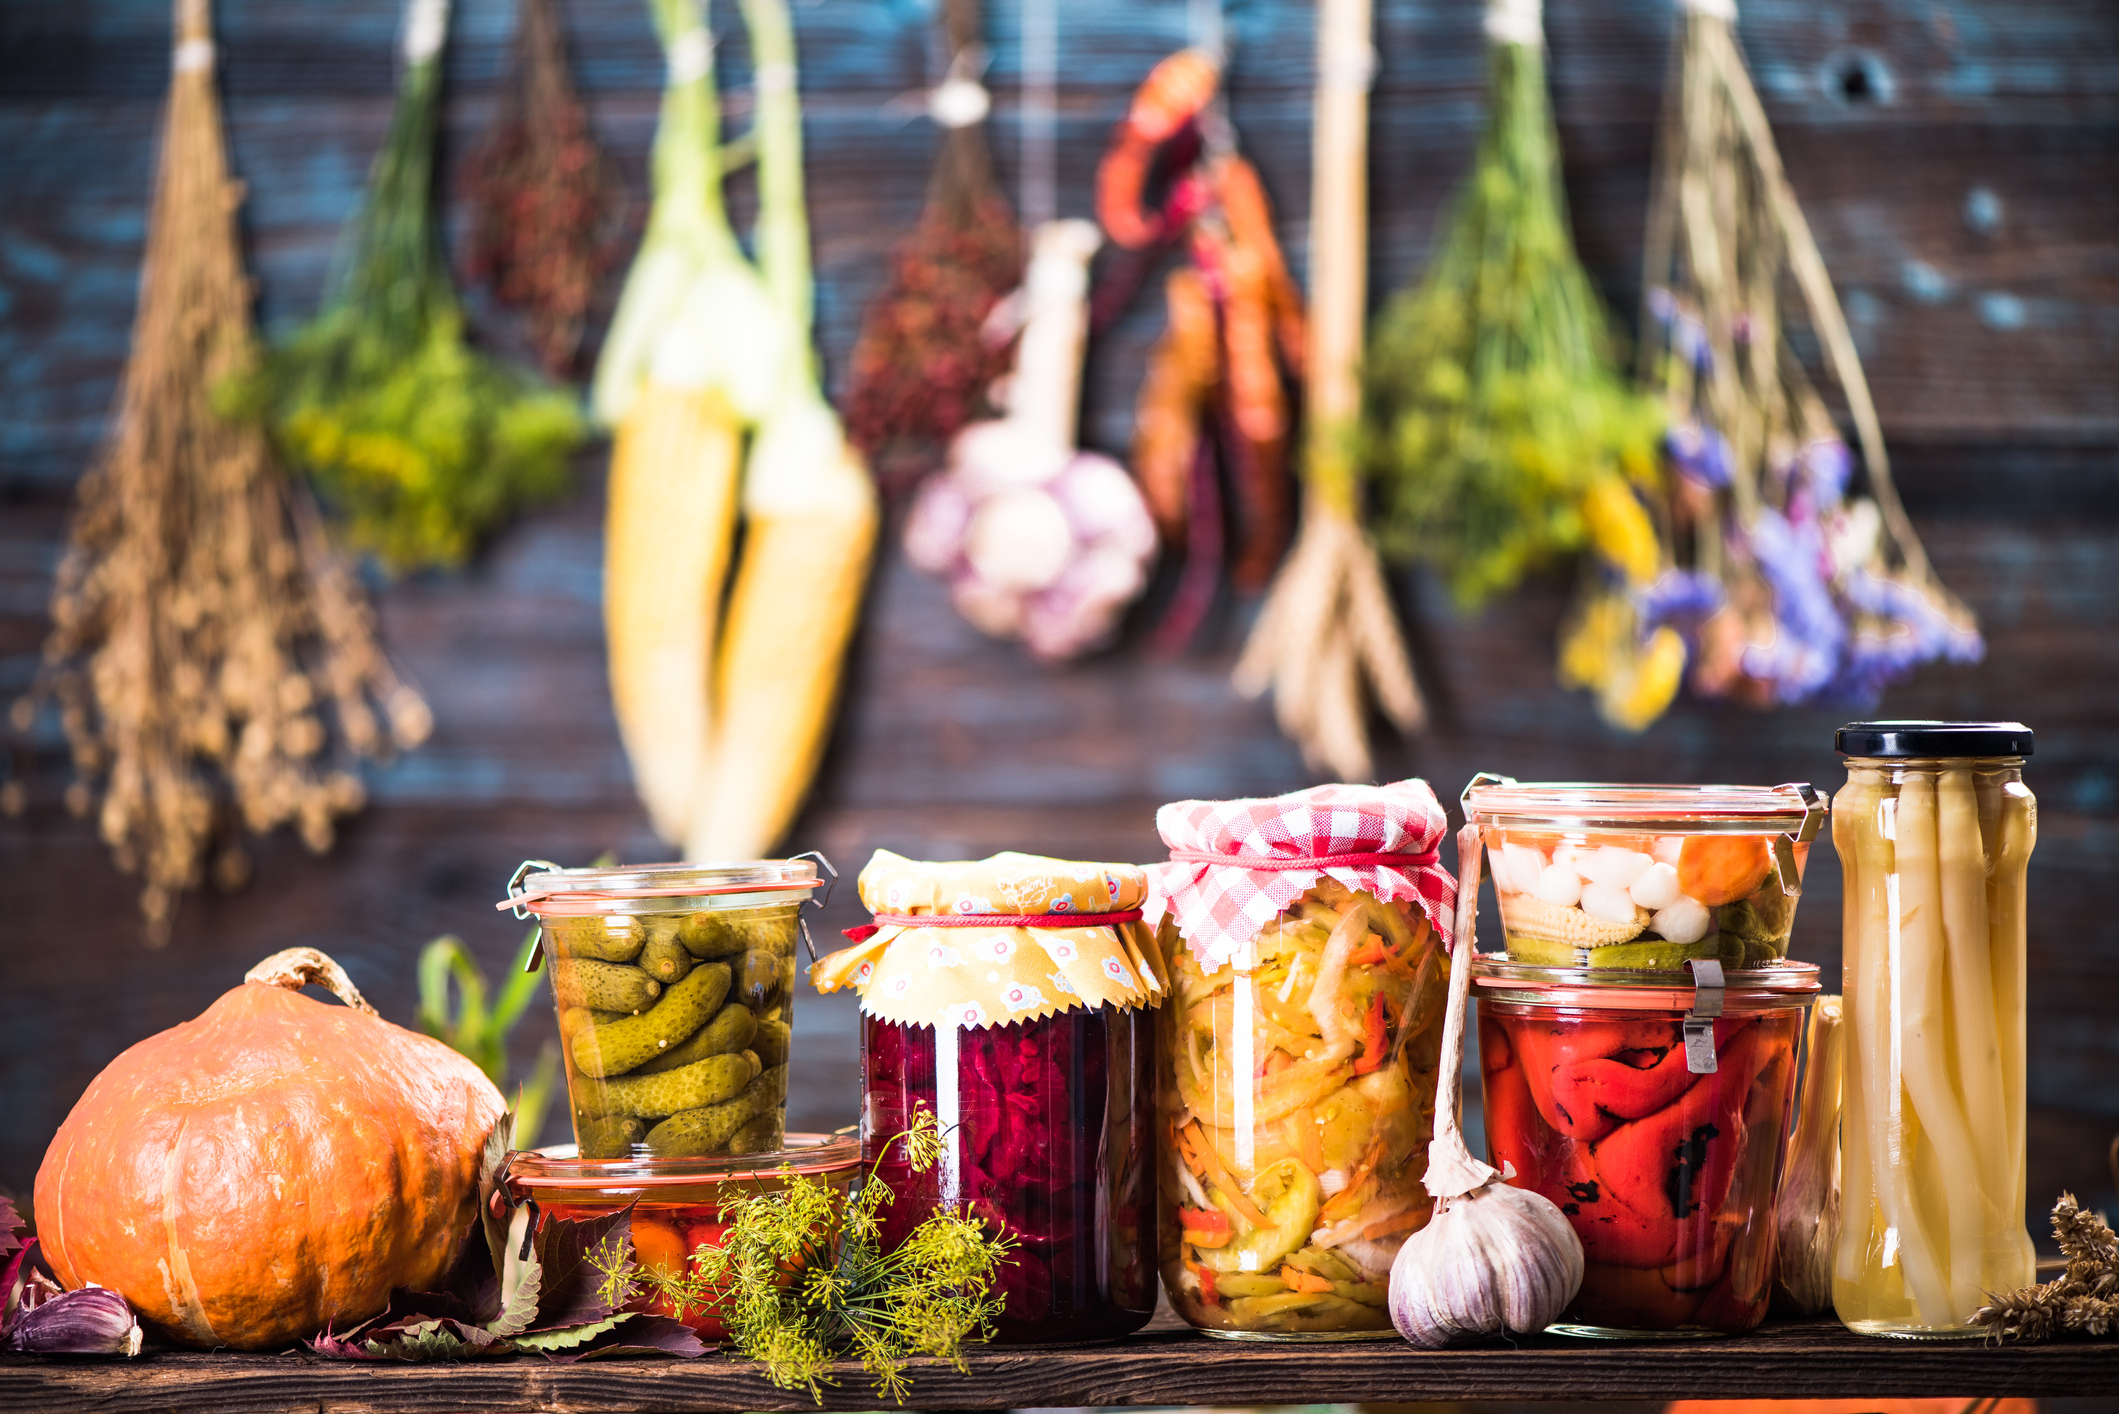 Are fermented foods good for PCOS?